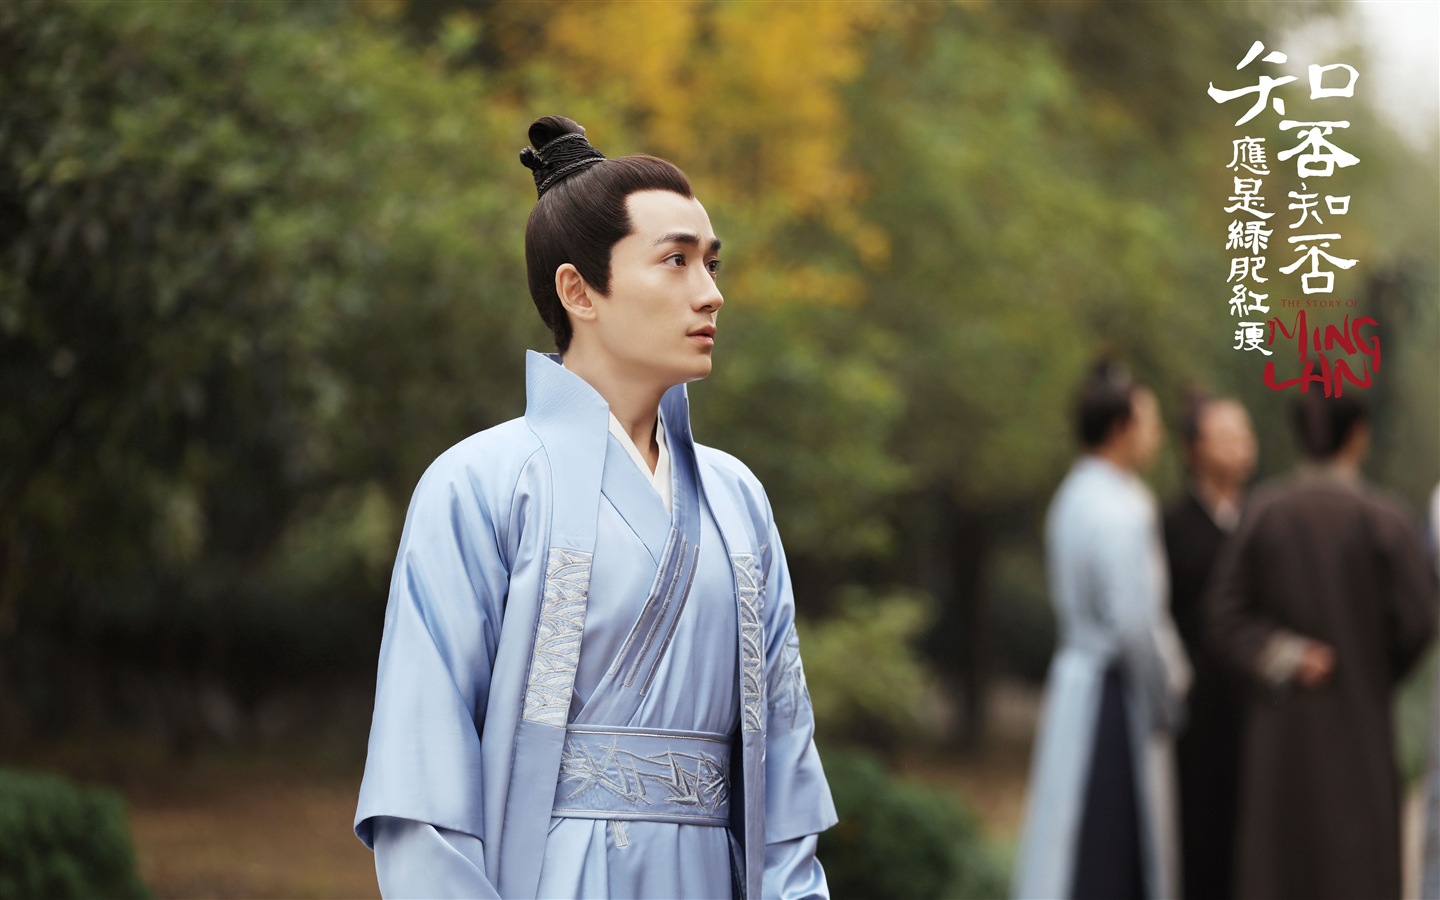 The Story Of MingLan, TV series HD wallpapers #55 - 1440x900